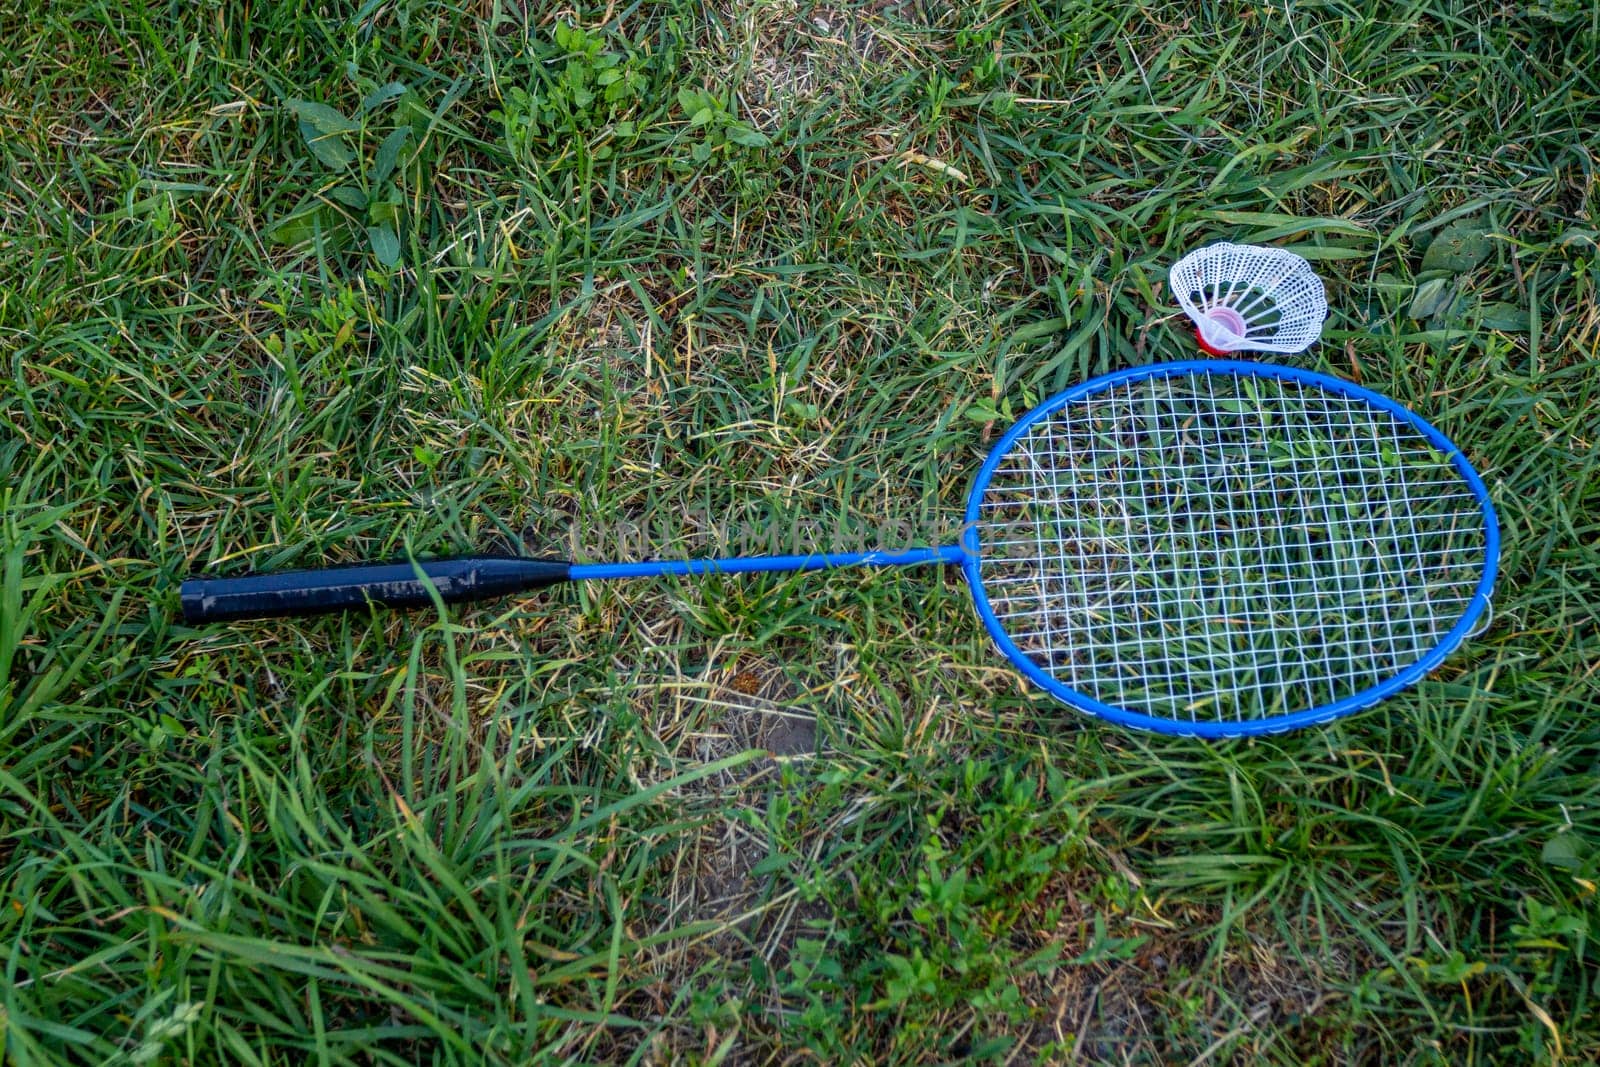 The badminton racket is lying on the green grass. Outdoor games. Sports equipment.